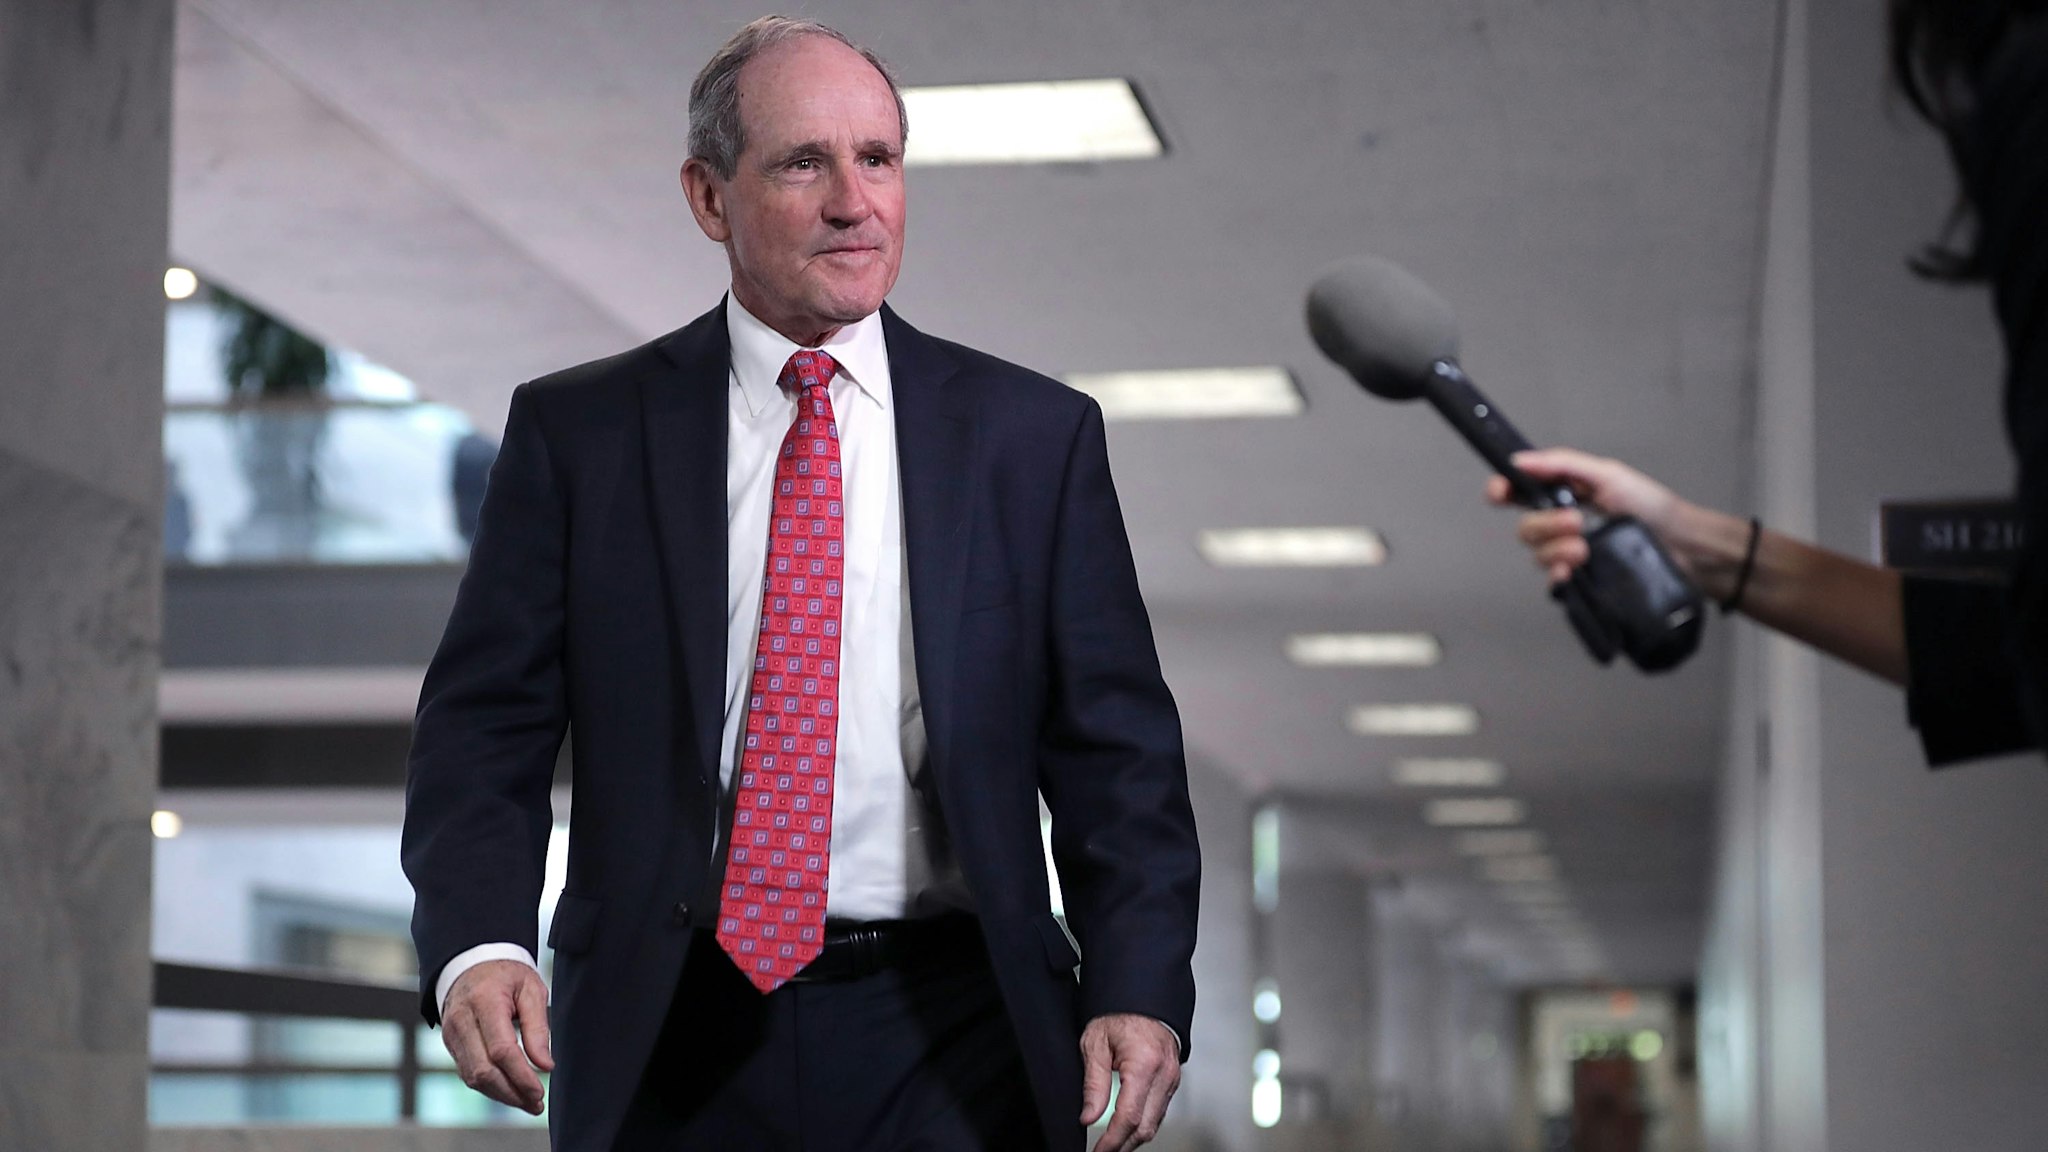 WASHINGTON, DC - APRIL 25: Senate Select Committee on Intelligence member Sen. James Risch (R-ID) arrives for a closed-door meeting in the Hart Senate Office Building on Capitol Hill April 25, 2017 in Washington, DC. The committee has entered the third month of its investigation into allegations of Russian meddling in the 2016 U.S. presidential election.